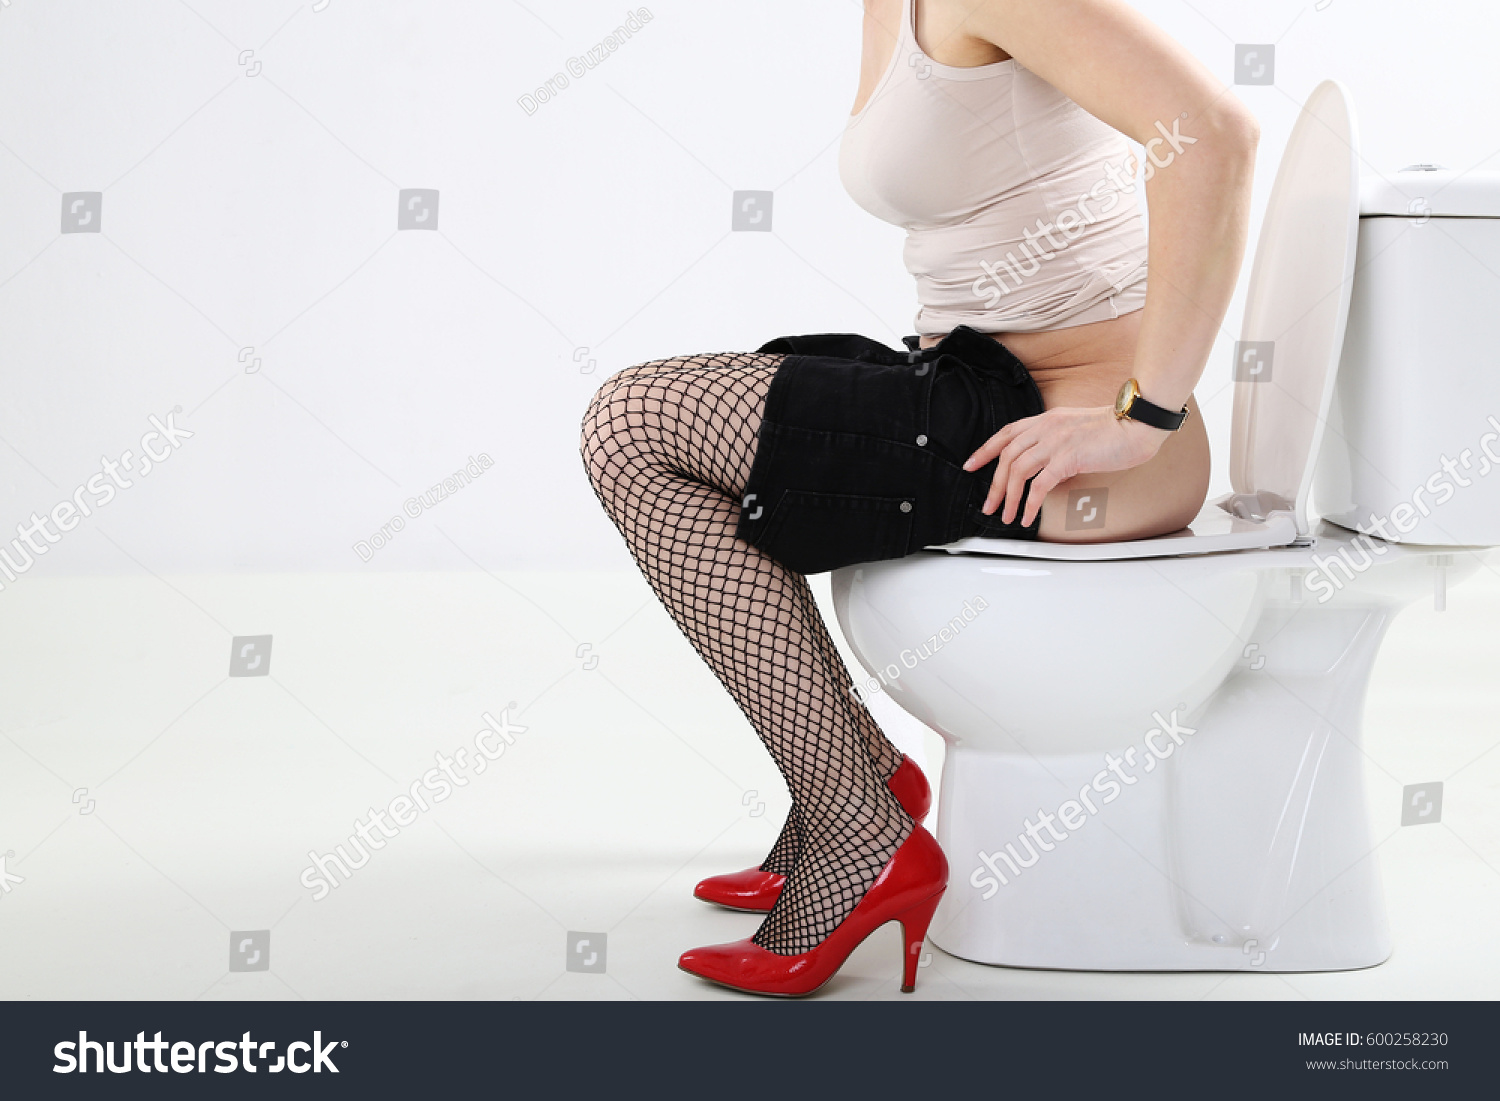 Young Woman Sitting On Toilet Stock Photo 225935416 